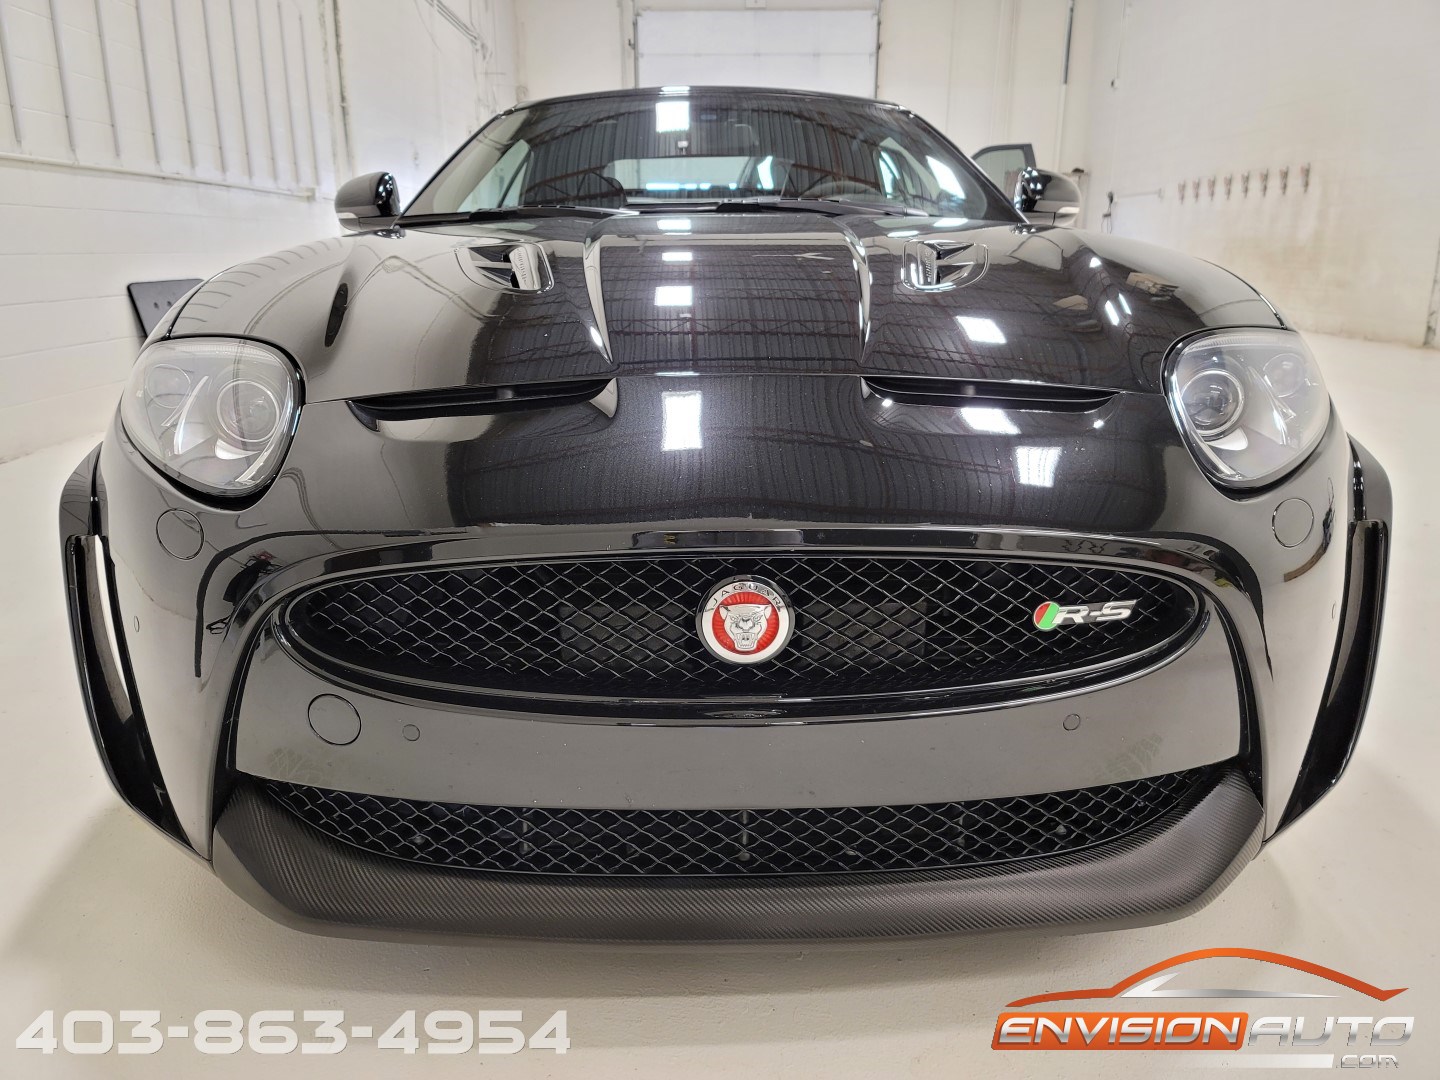 2015 JAGUAR XKR-S CONVERTIBLE  1 OF 22  ONLY 39,000KMS - Envision Auto